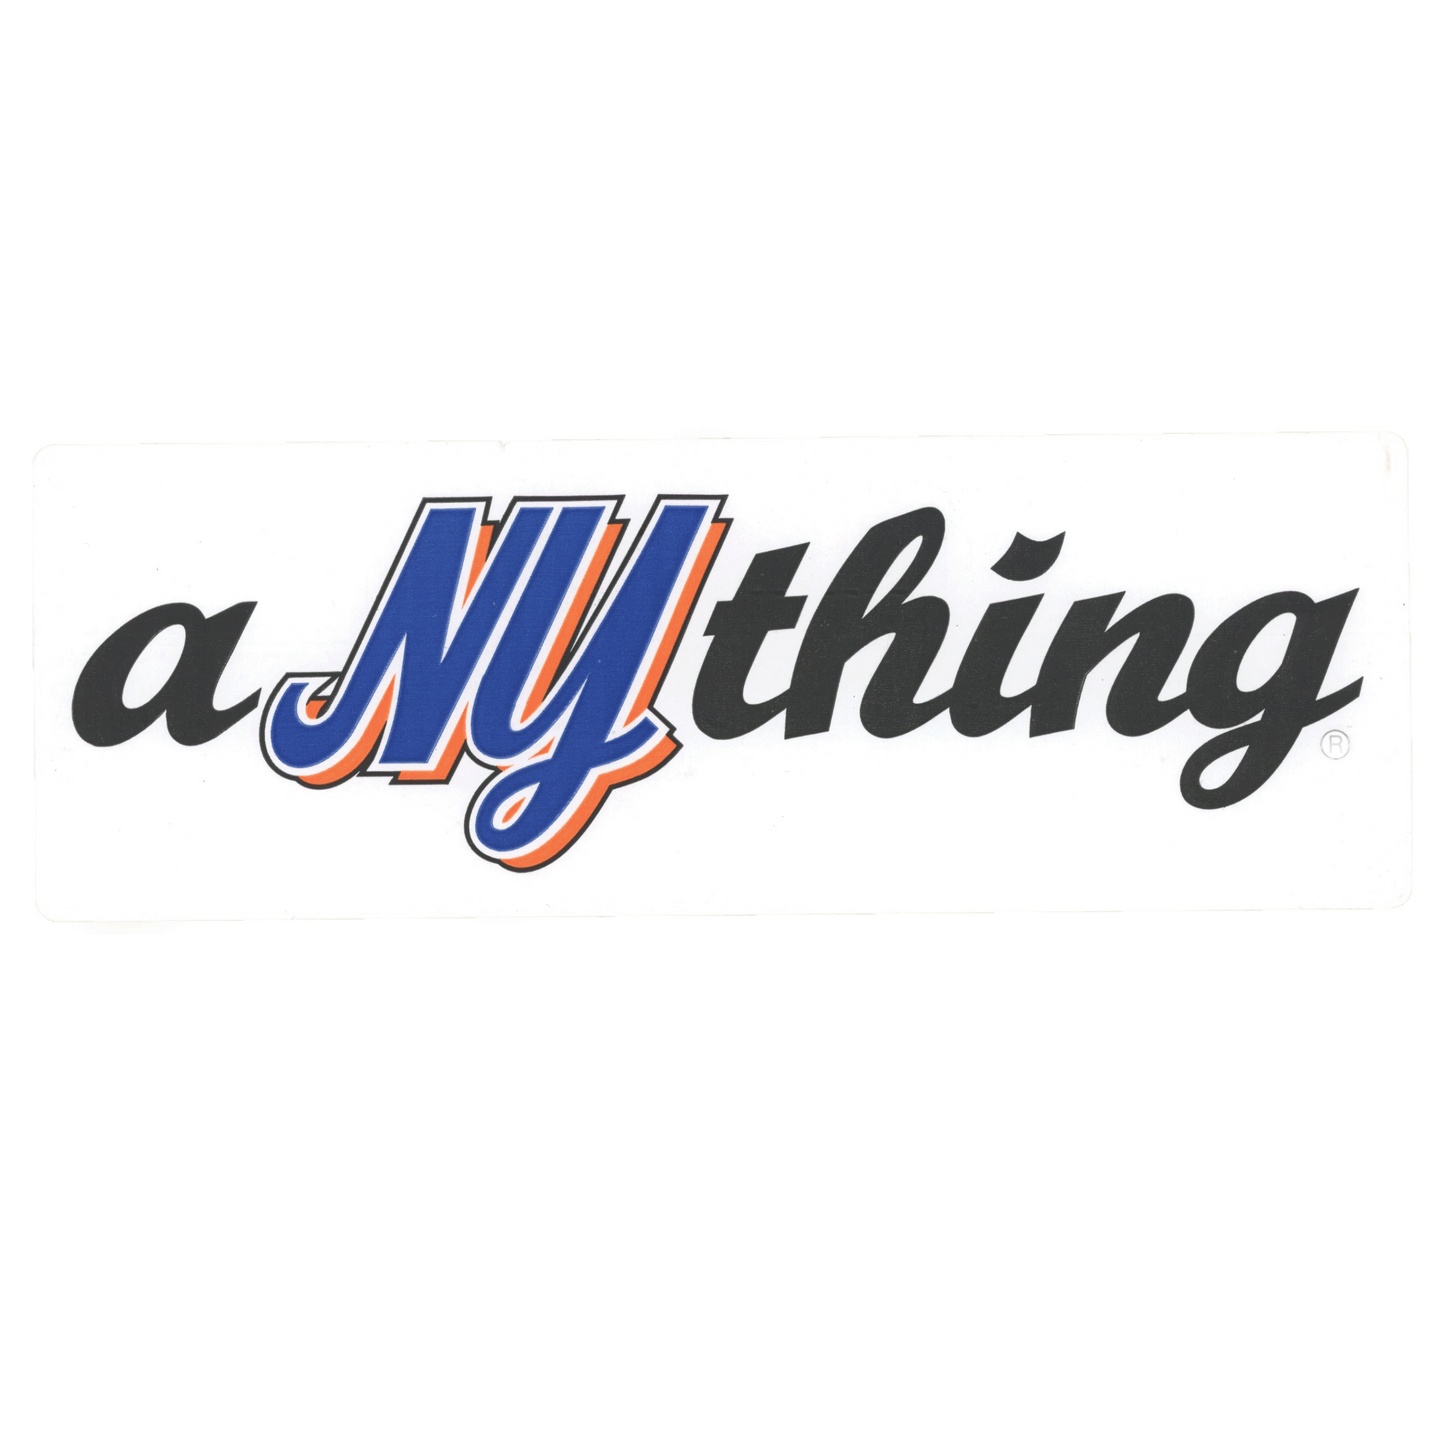 A NY Thing Large Script Logo Sticker